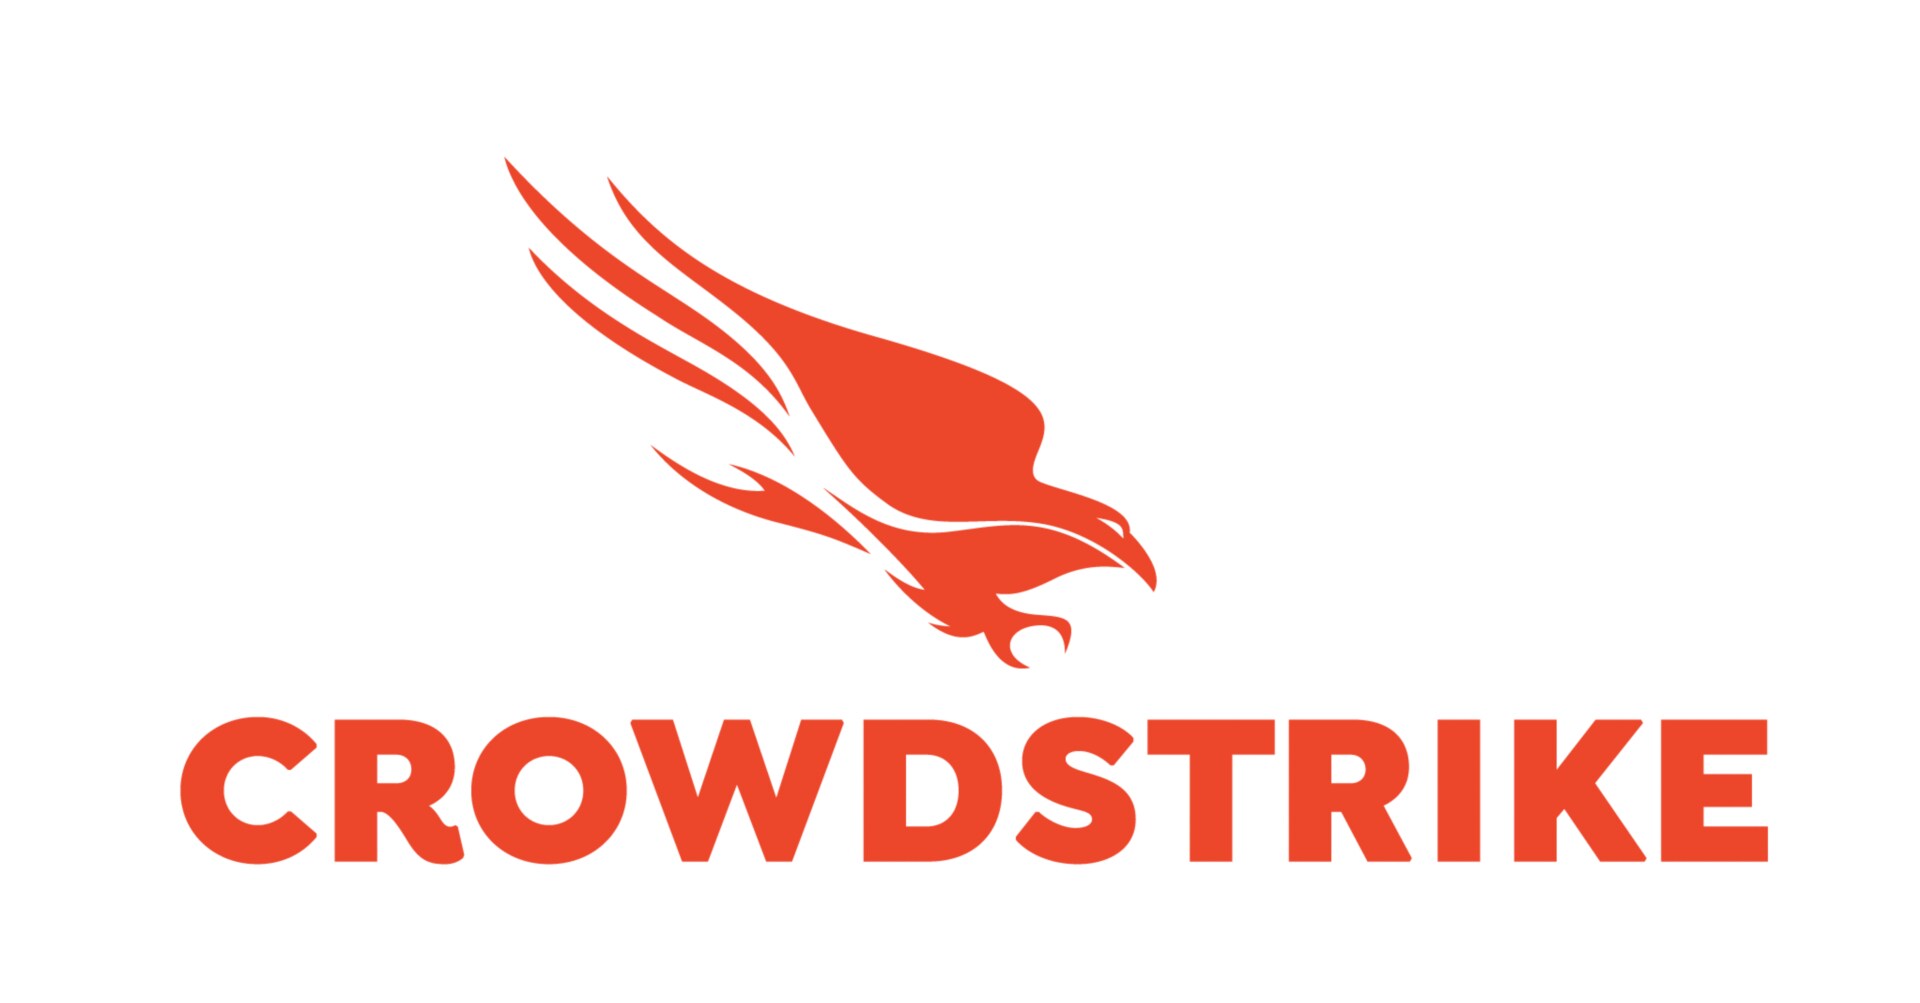 CrowdStrike 12-Month Falcon Discover - (Discovery Solution) Software Subscription (150-299 Licenses)